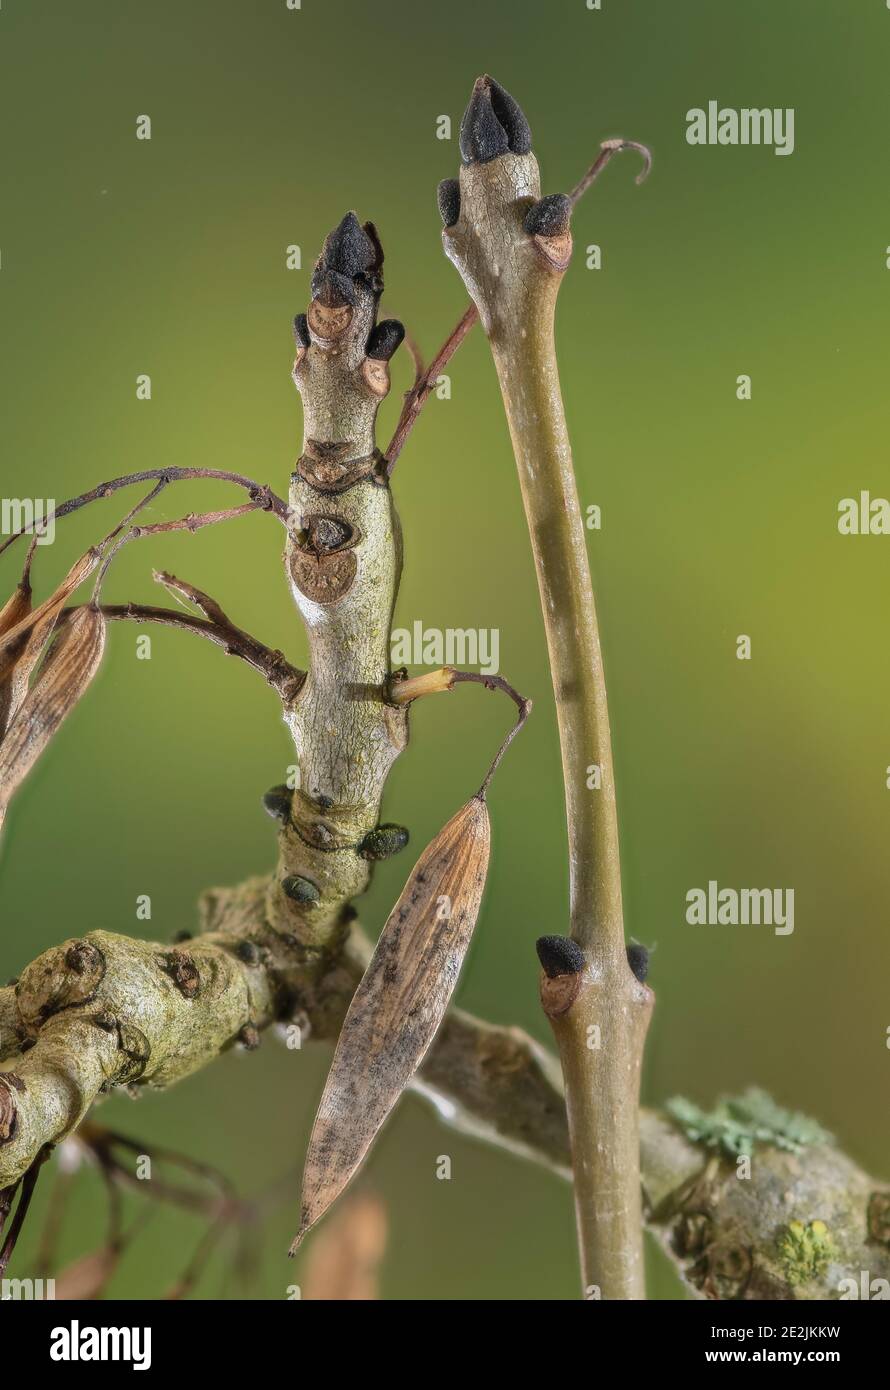 Common ash, Fraxinus excelsior, in early winter - buds and keys (fruit). Stock Photo